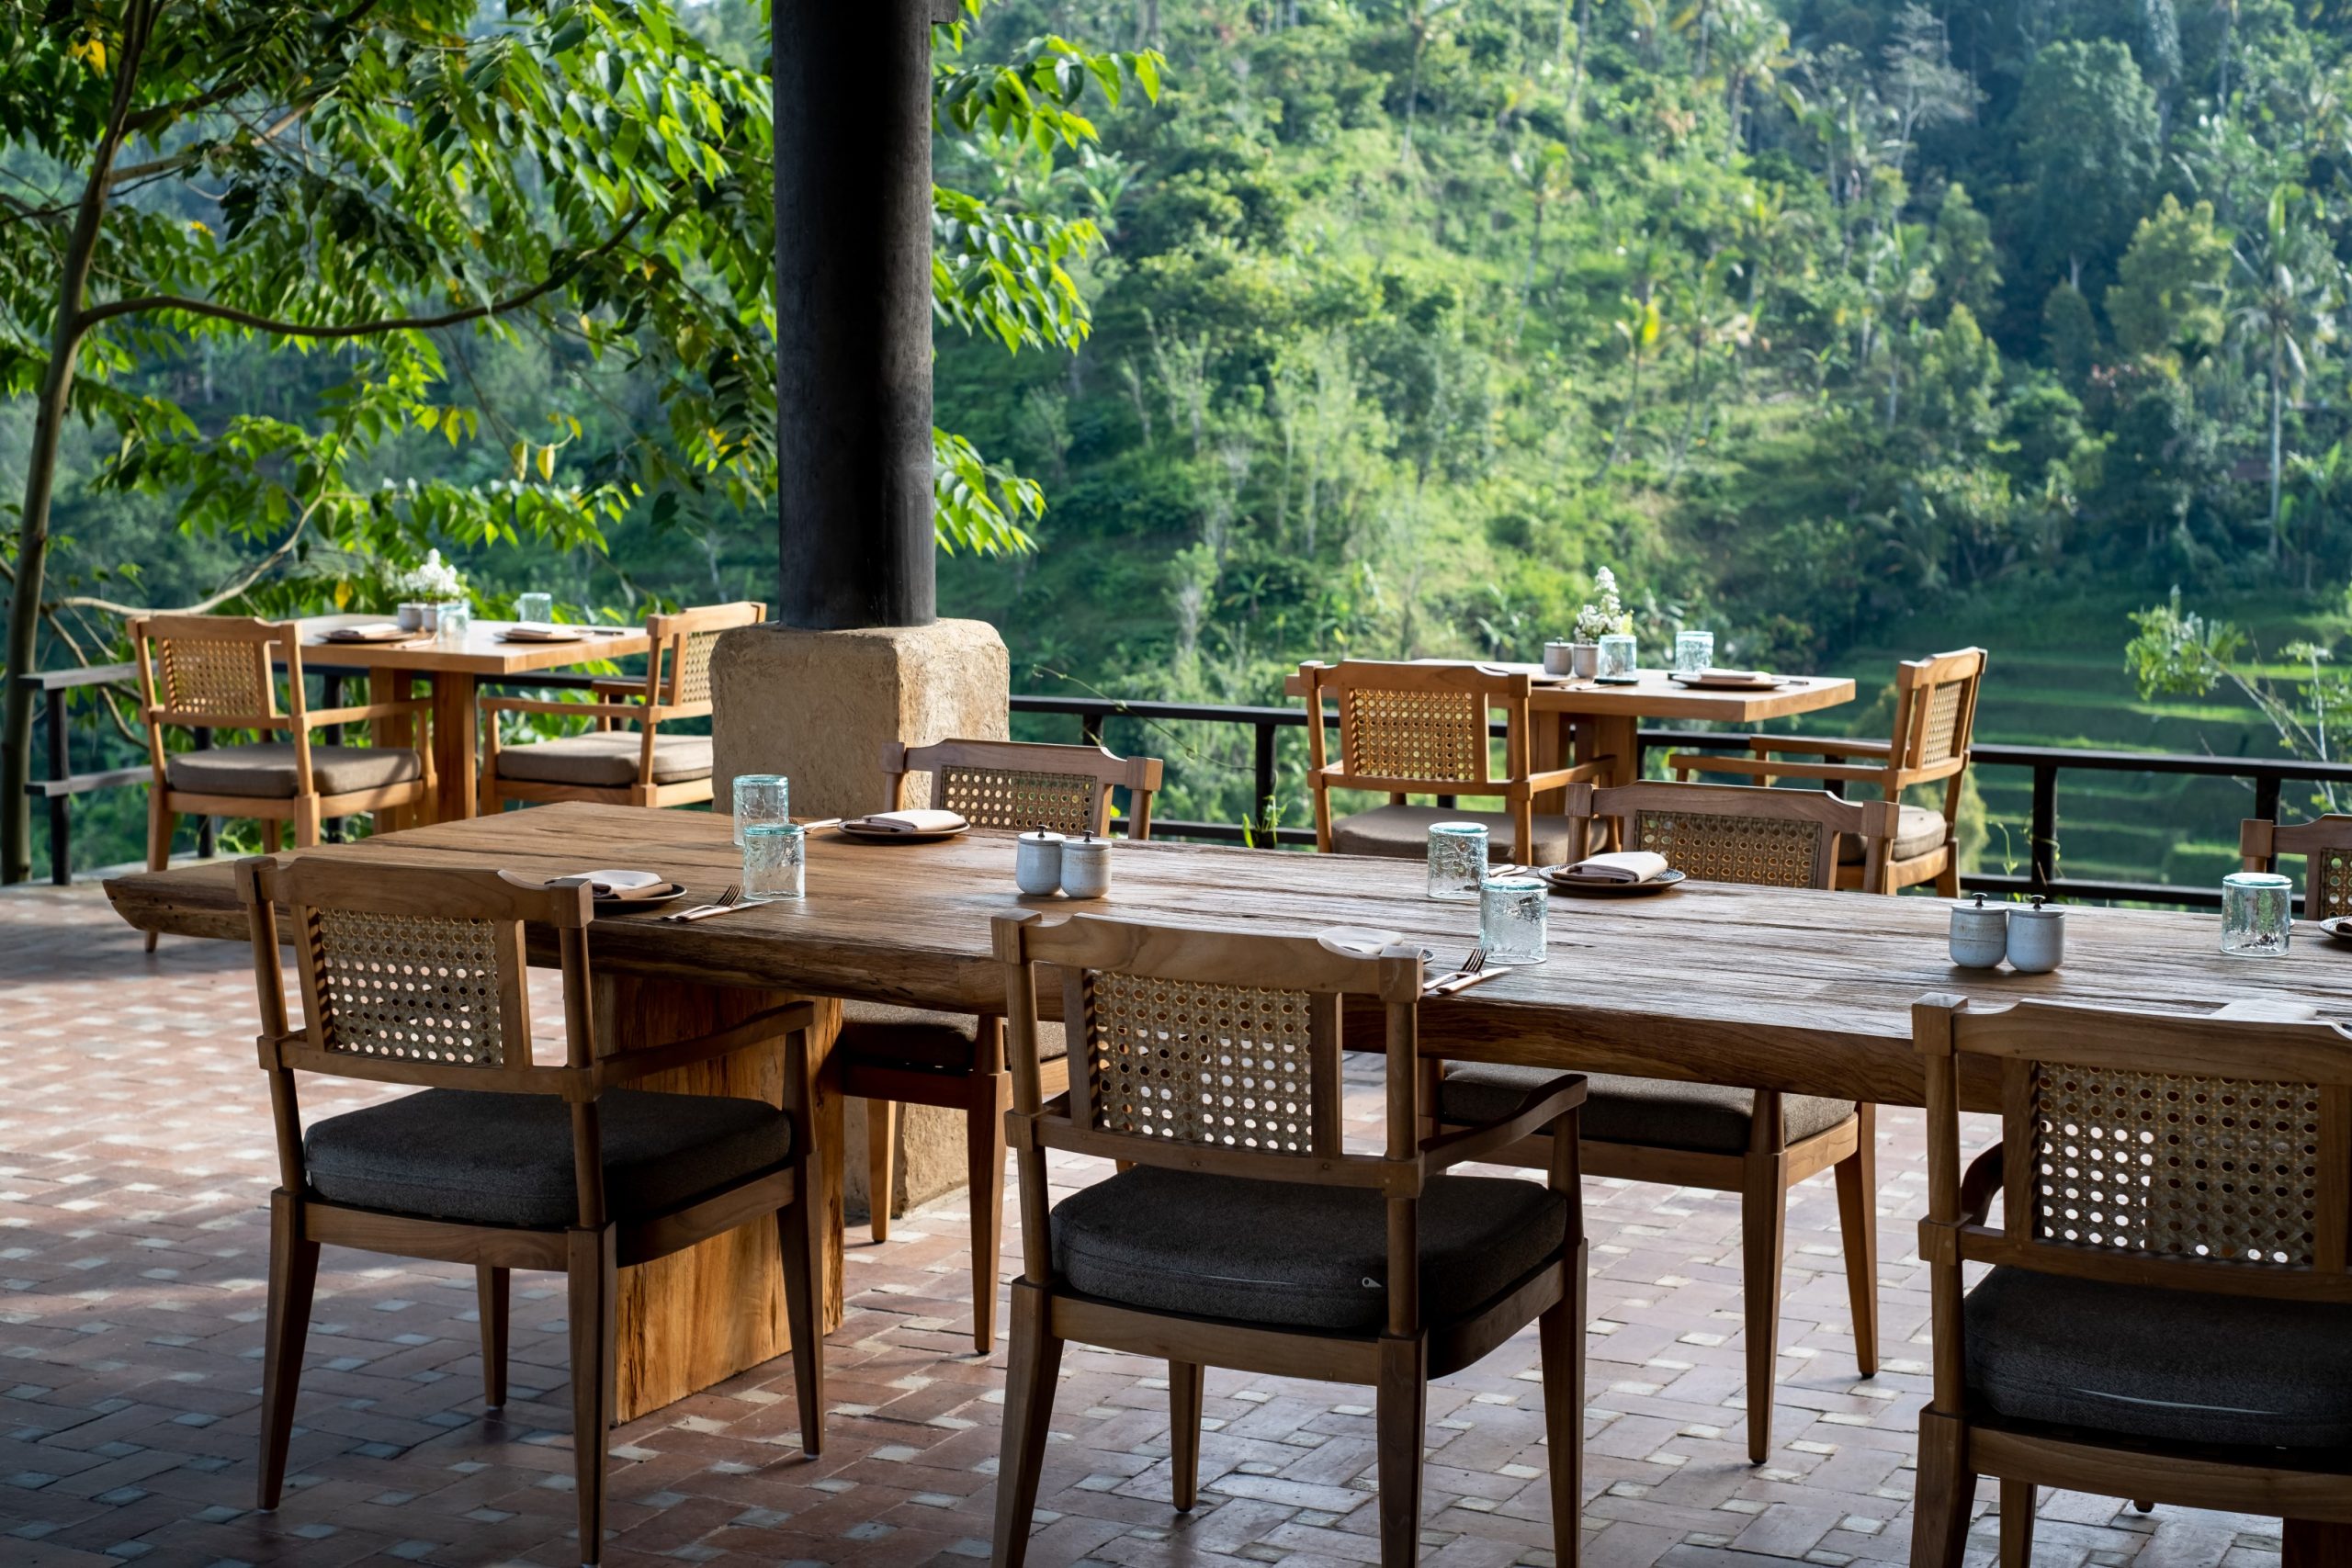 , Infinite layers of green unveil nature’s delights at Buahan, a Banyan Tree Escape